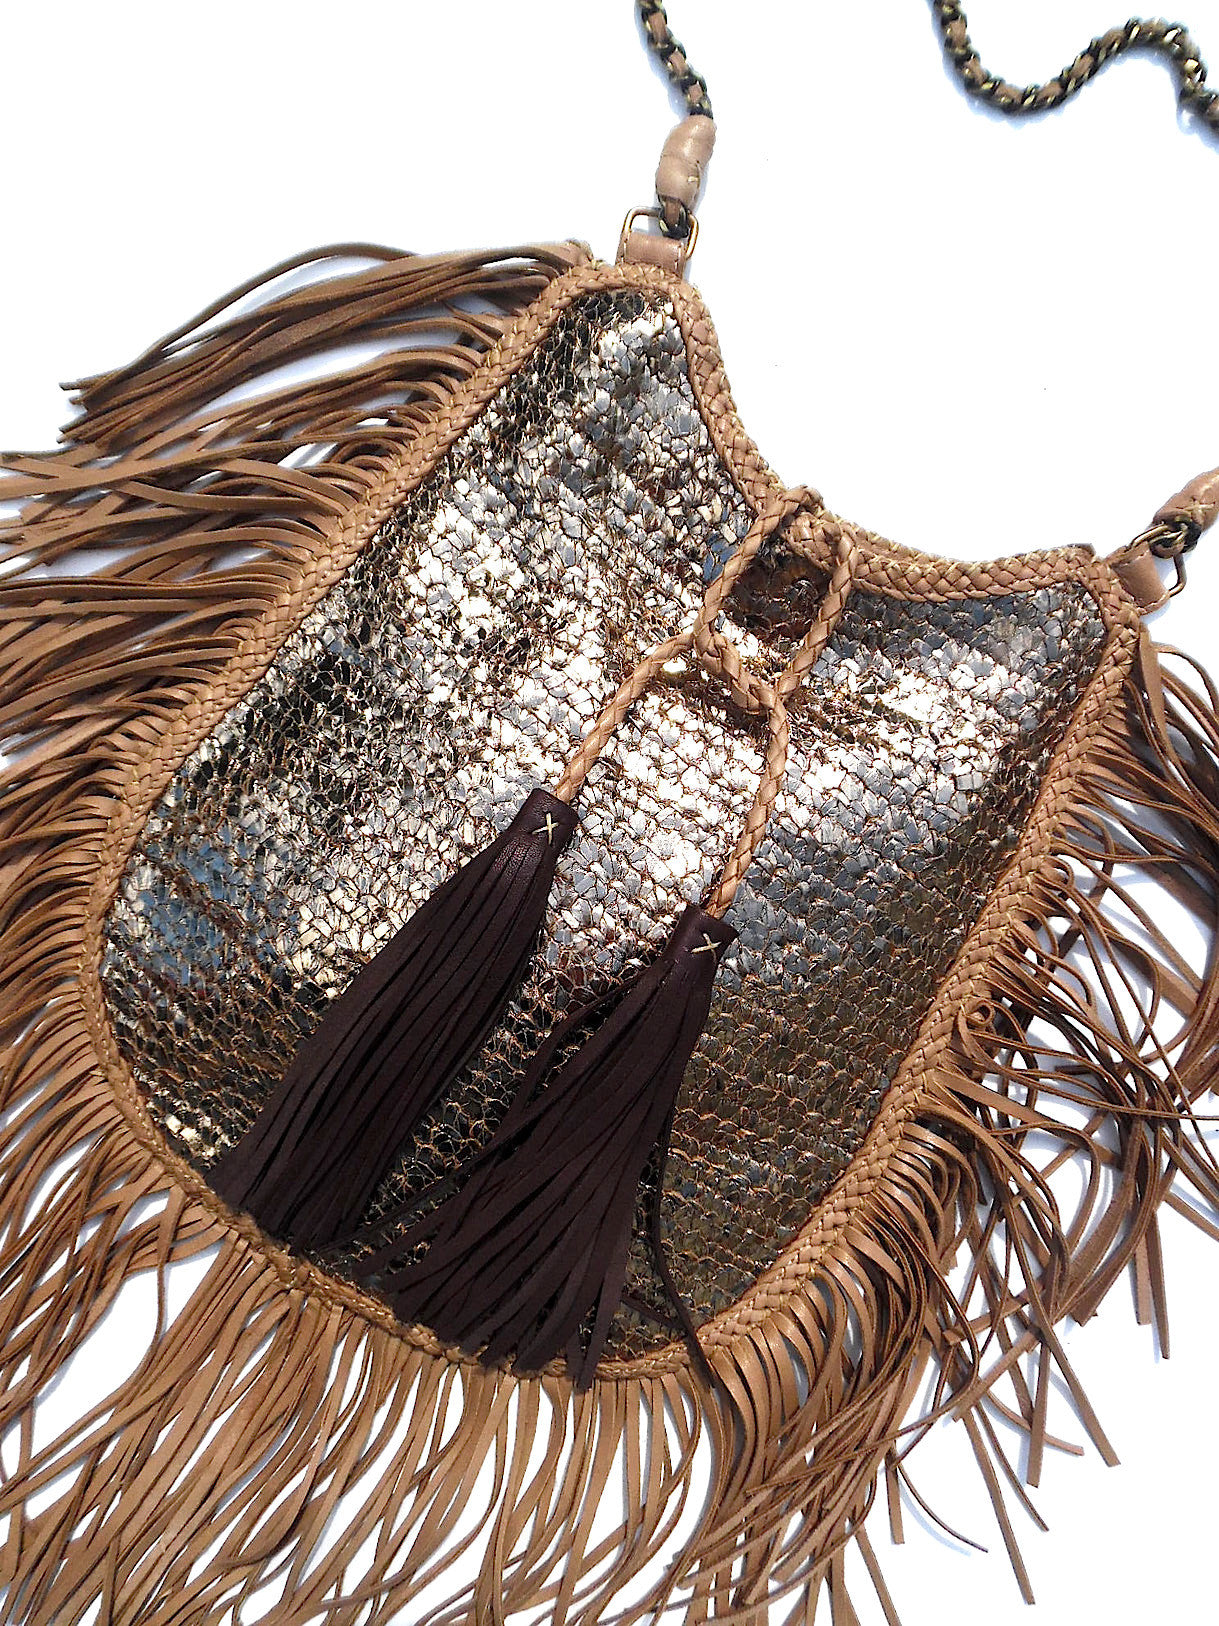 Hand Woven Leather Shoulder Cross Body Bag with Contrast Tassel